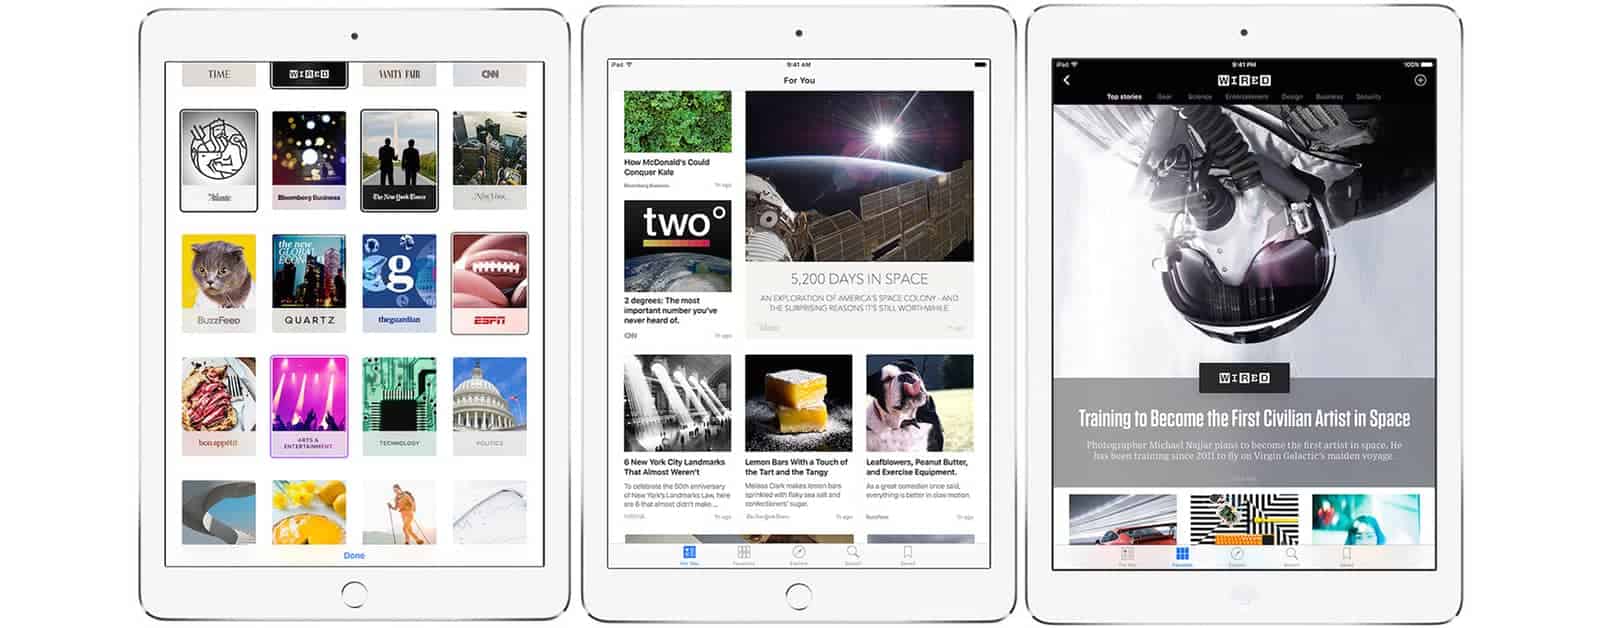 Apple News Will Soon Have More Ads, Maybe Micropayments